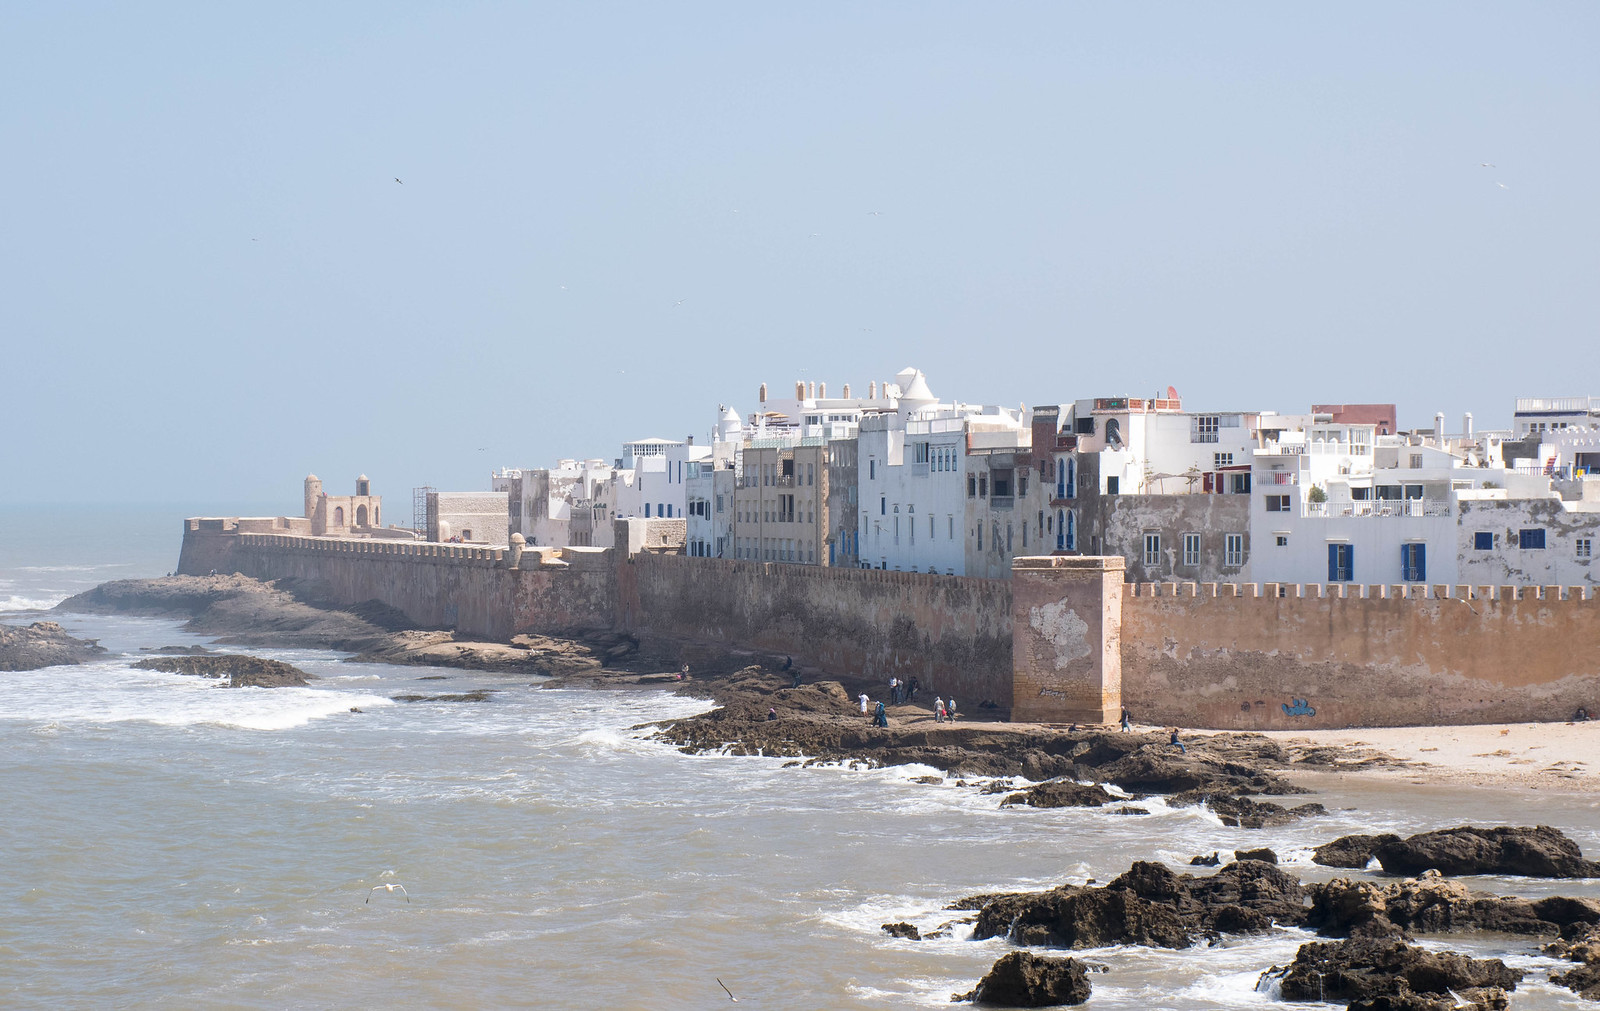 walking along these ocean walls to the city is one of the best things to do in Essaouira Morocco